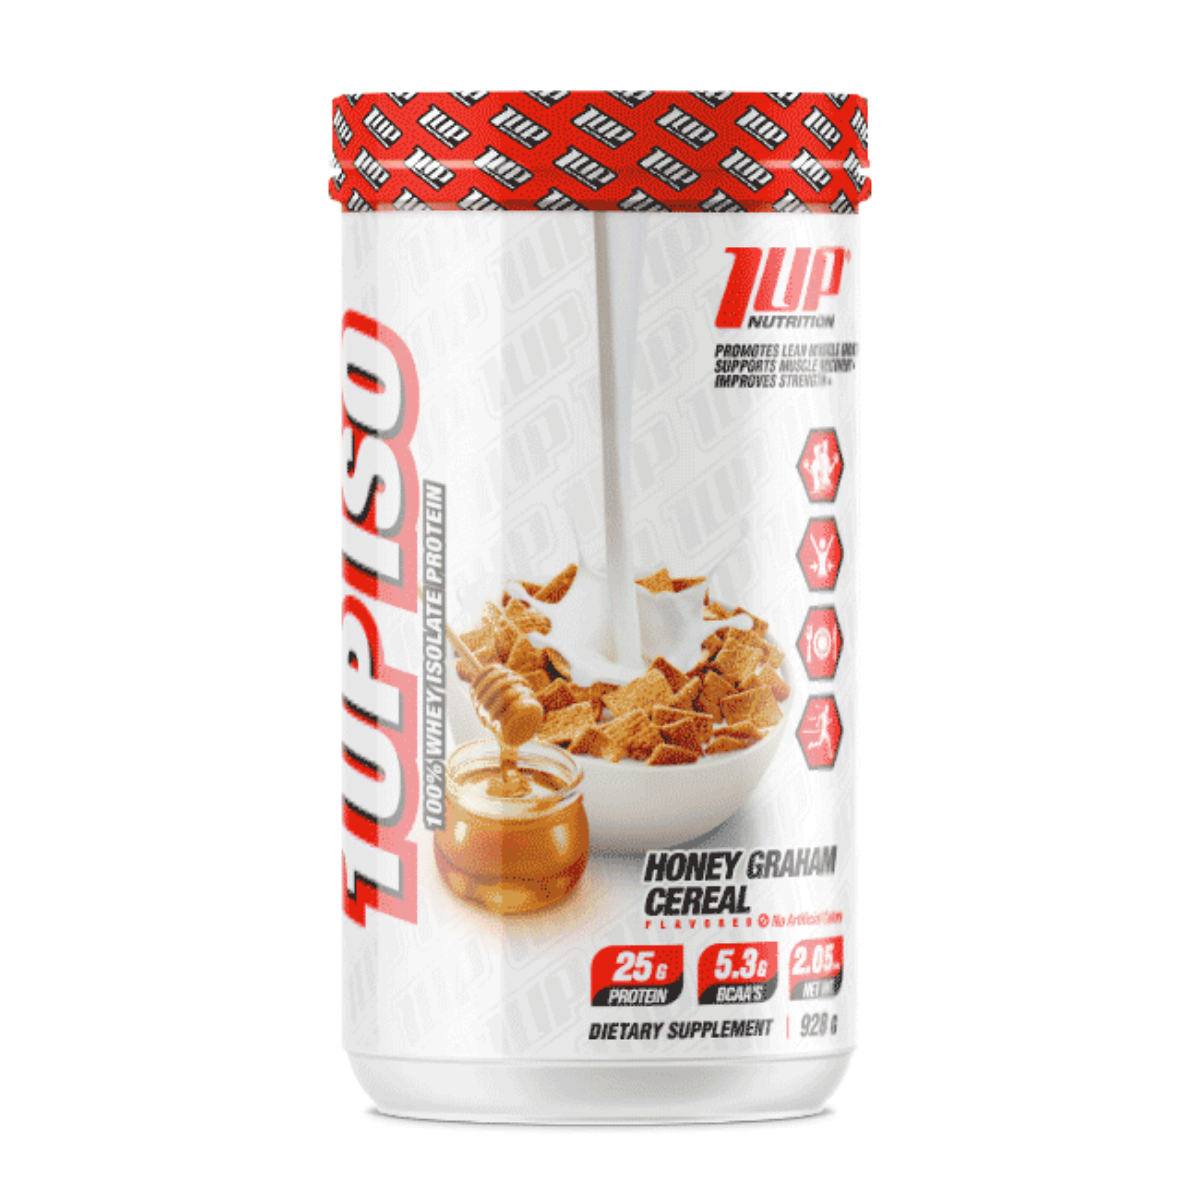 Iso Whey Protein (30 Servicios), 1up Nutrition